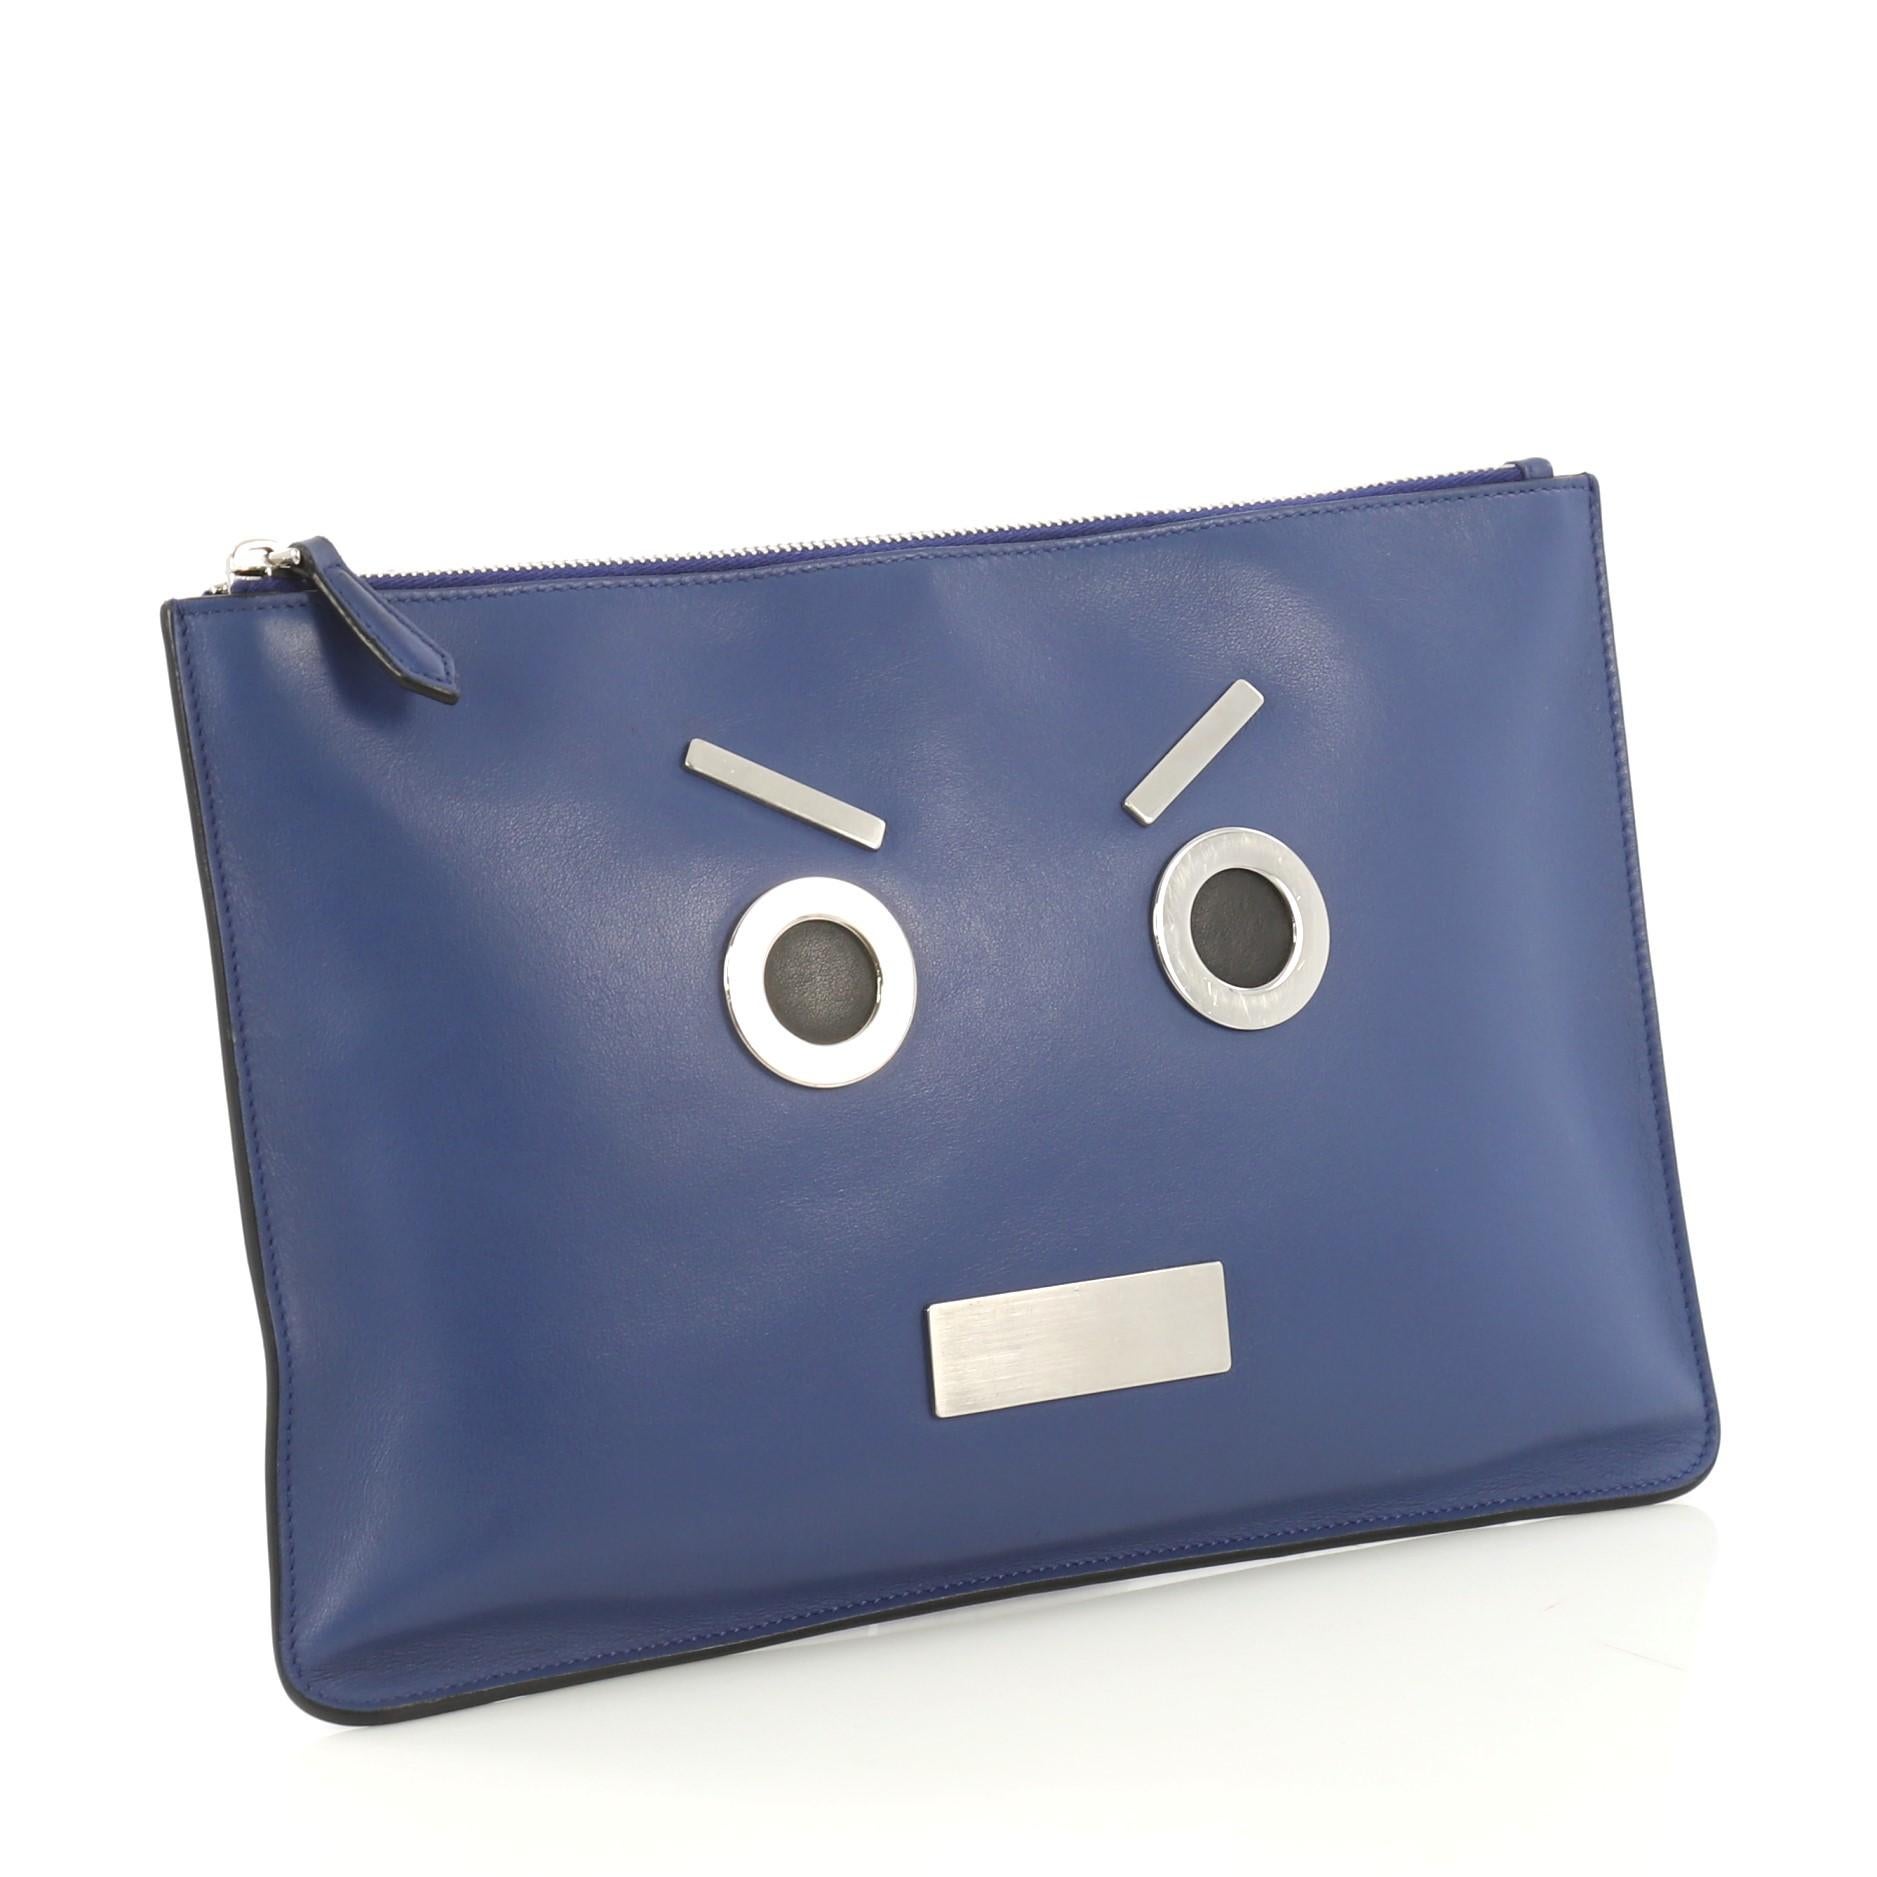 This Fendi Faces Pouch Leather Medium, crafted from blue leather, features 